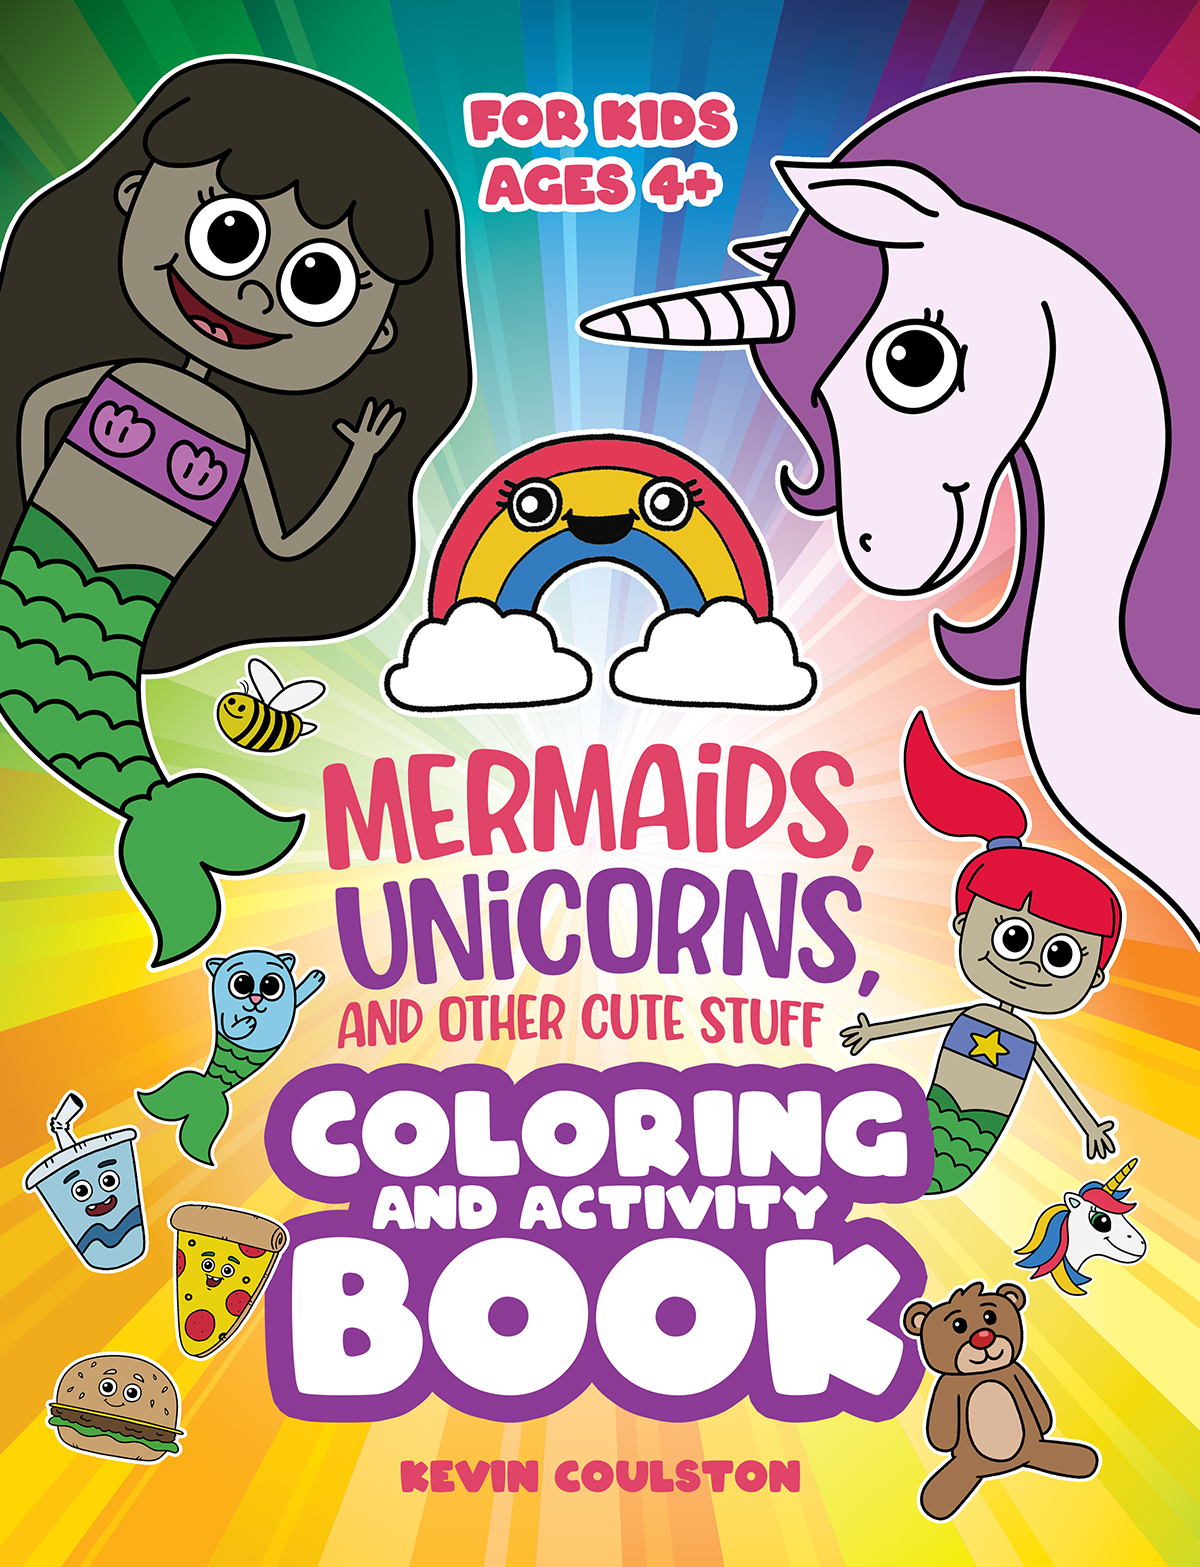 Mermaids, Unicorns, and Other Cute Stuff Coloring Book